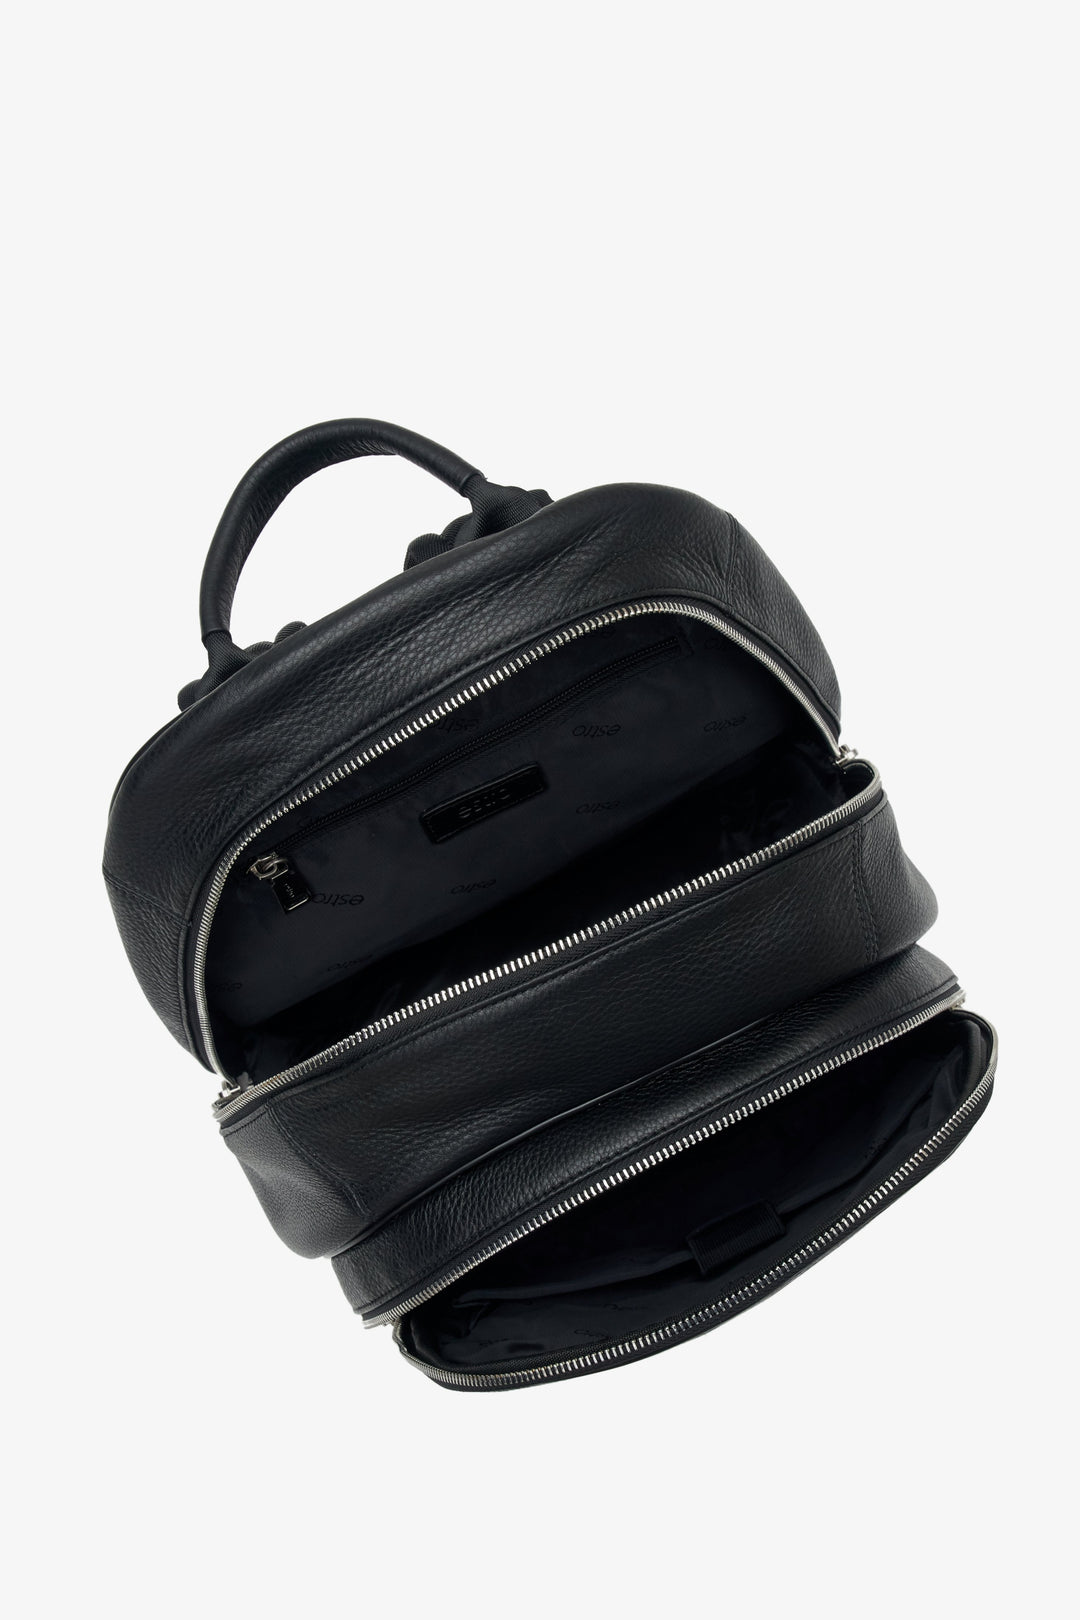 Men's large, black leather backpack by Estro - close-up on the interior view.